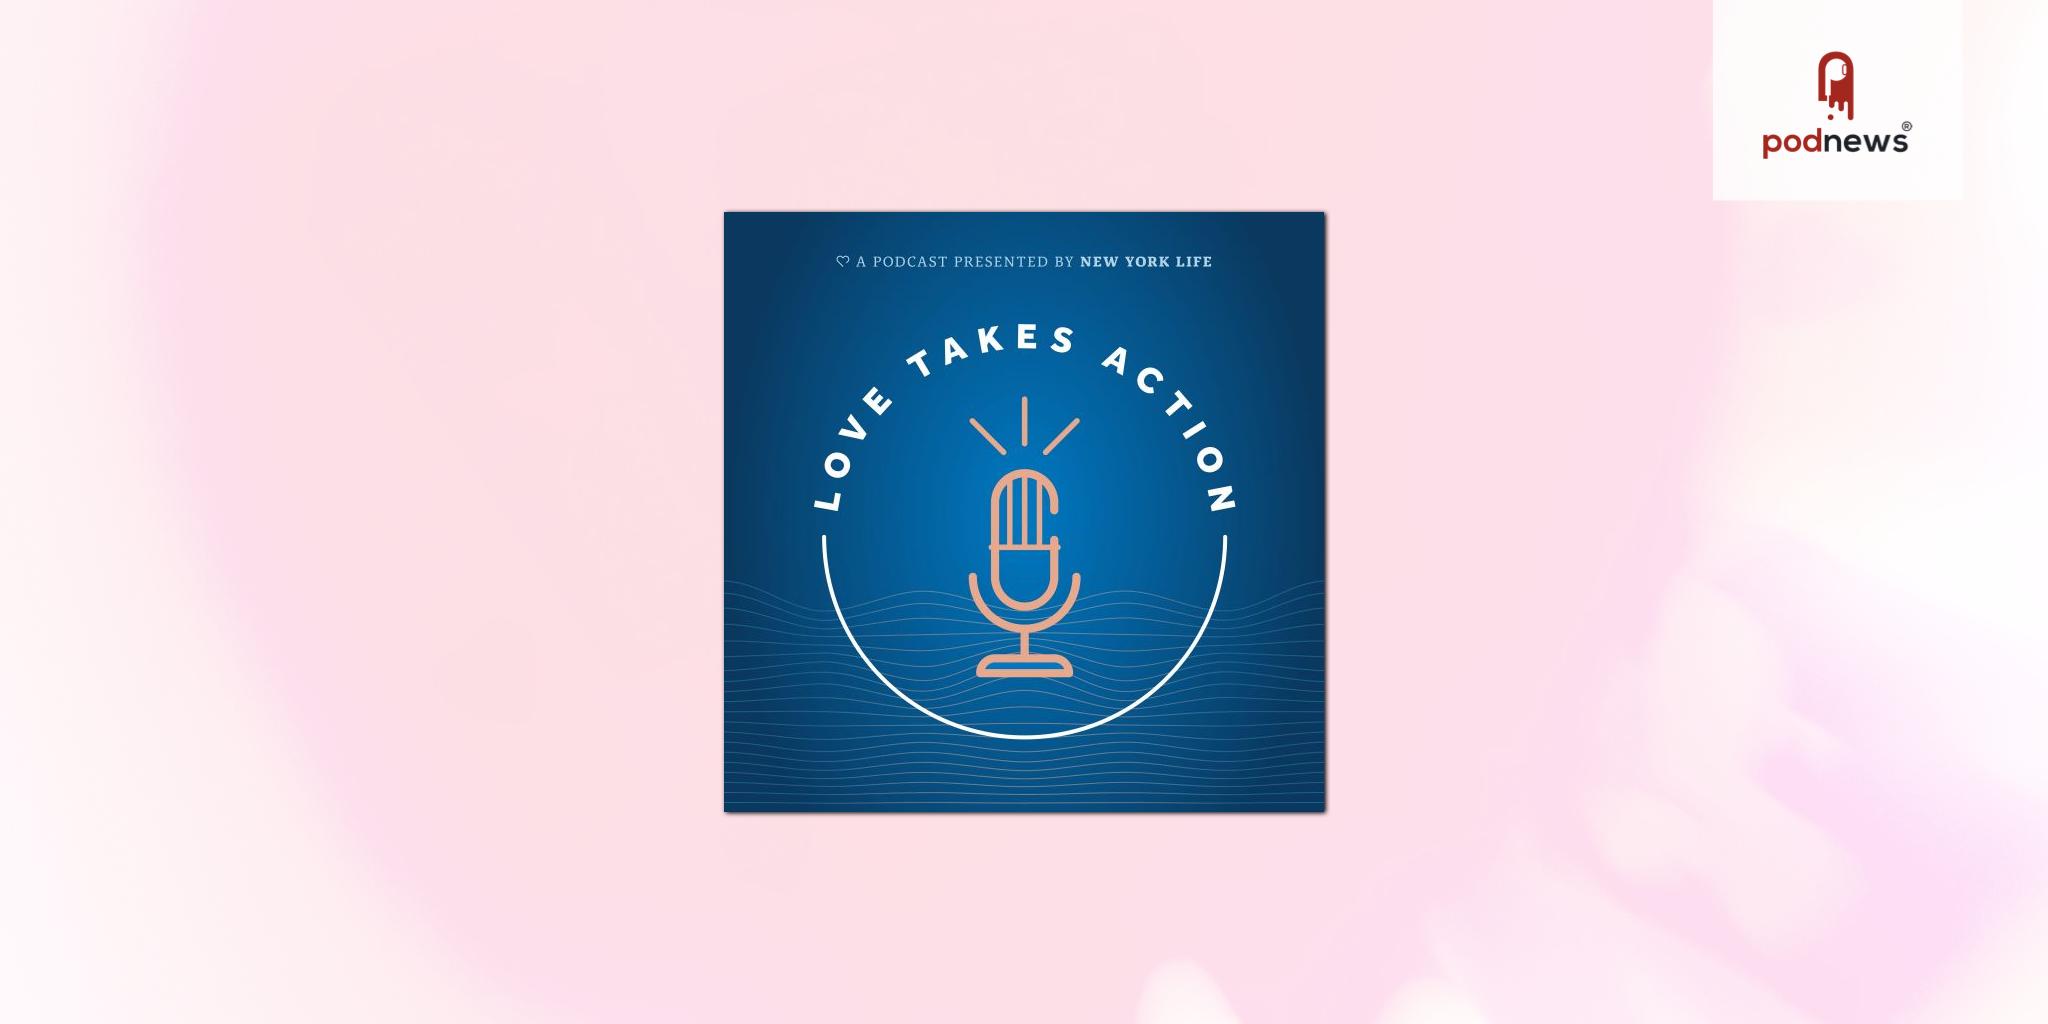 New York Life Launches Love Takes Action Podcast Series